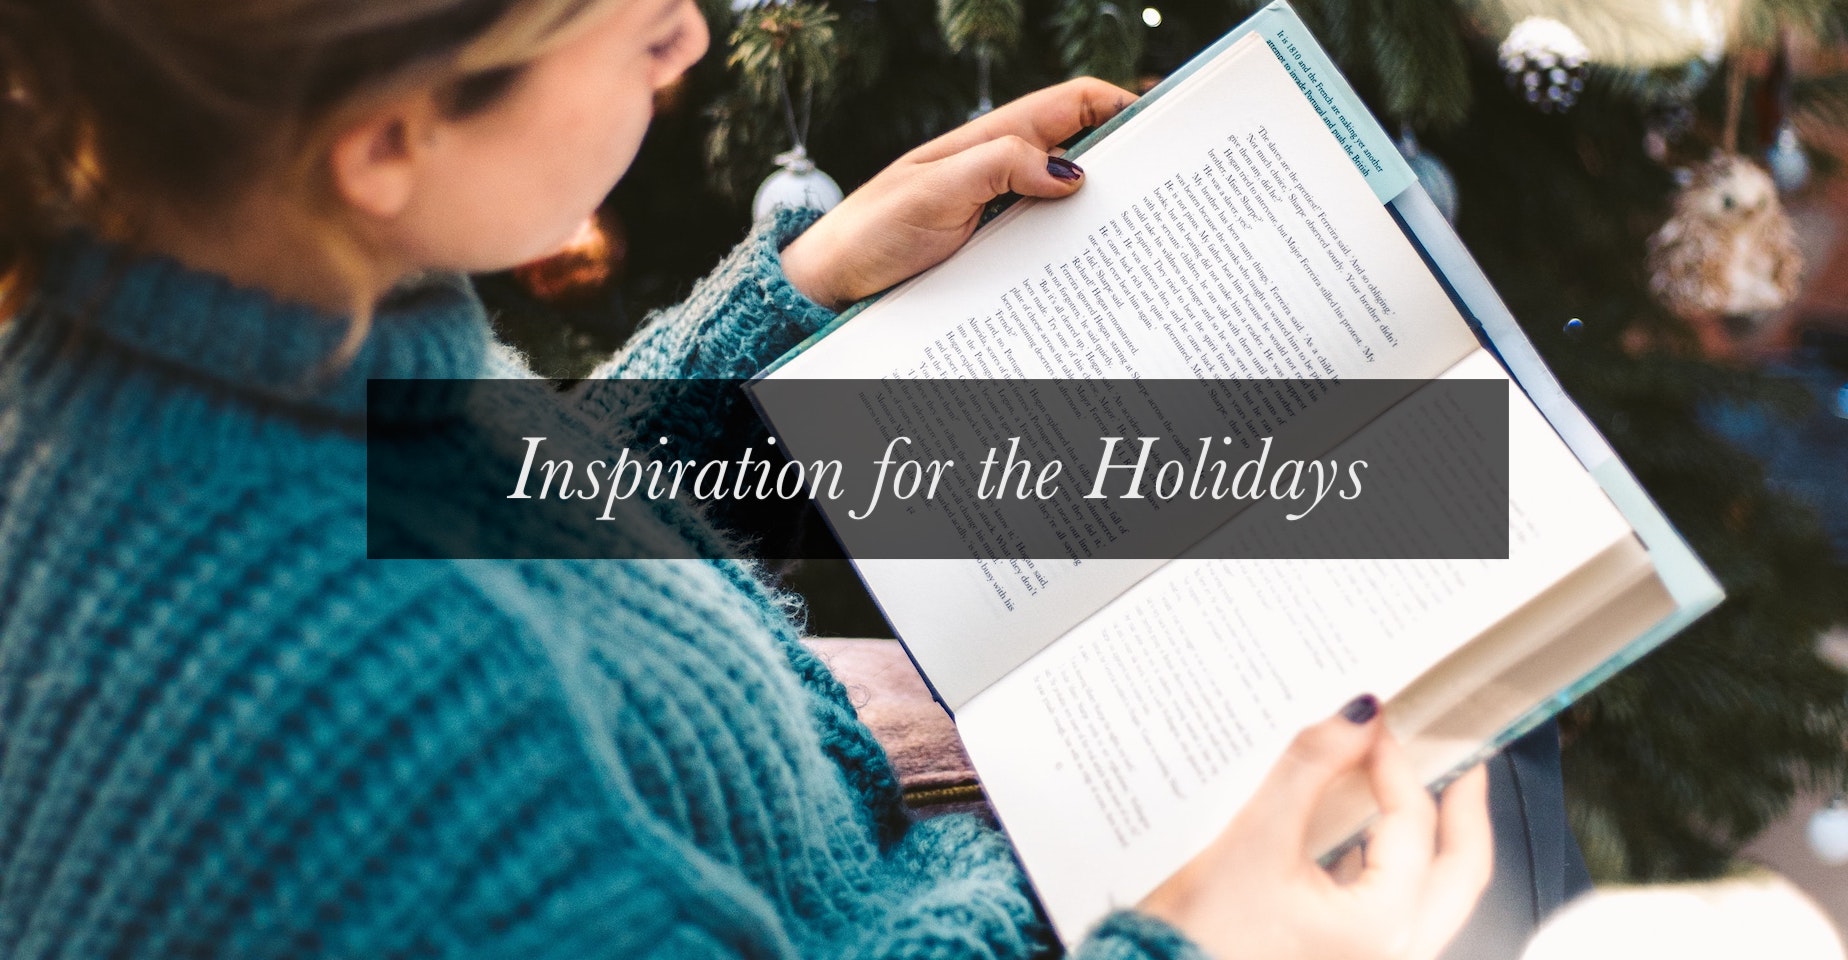 cozy books for the holidays cover